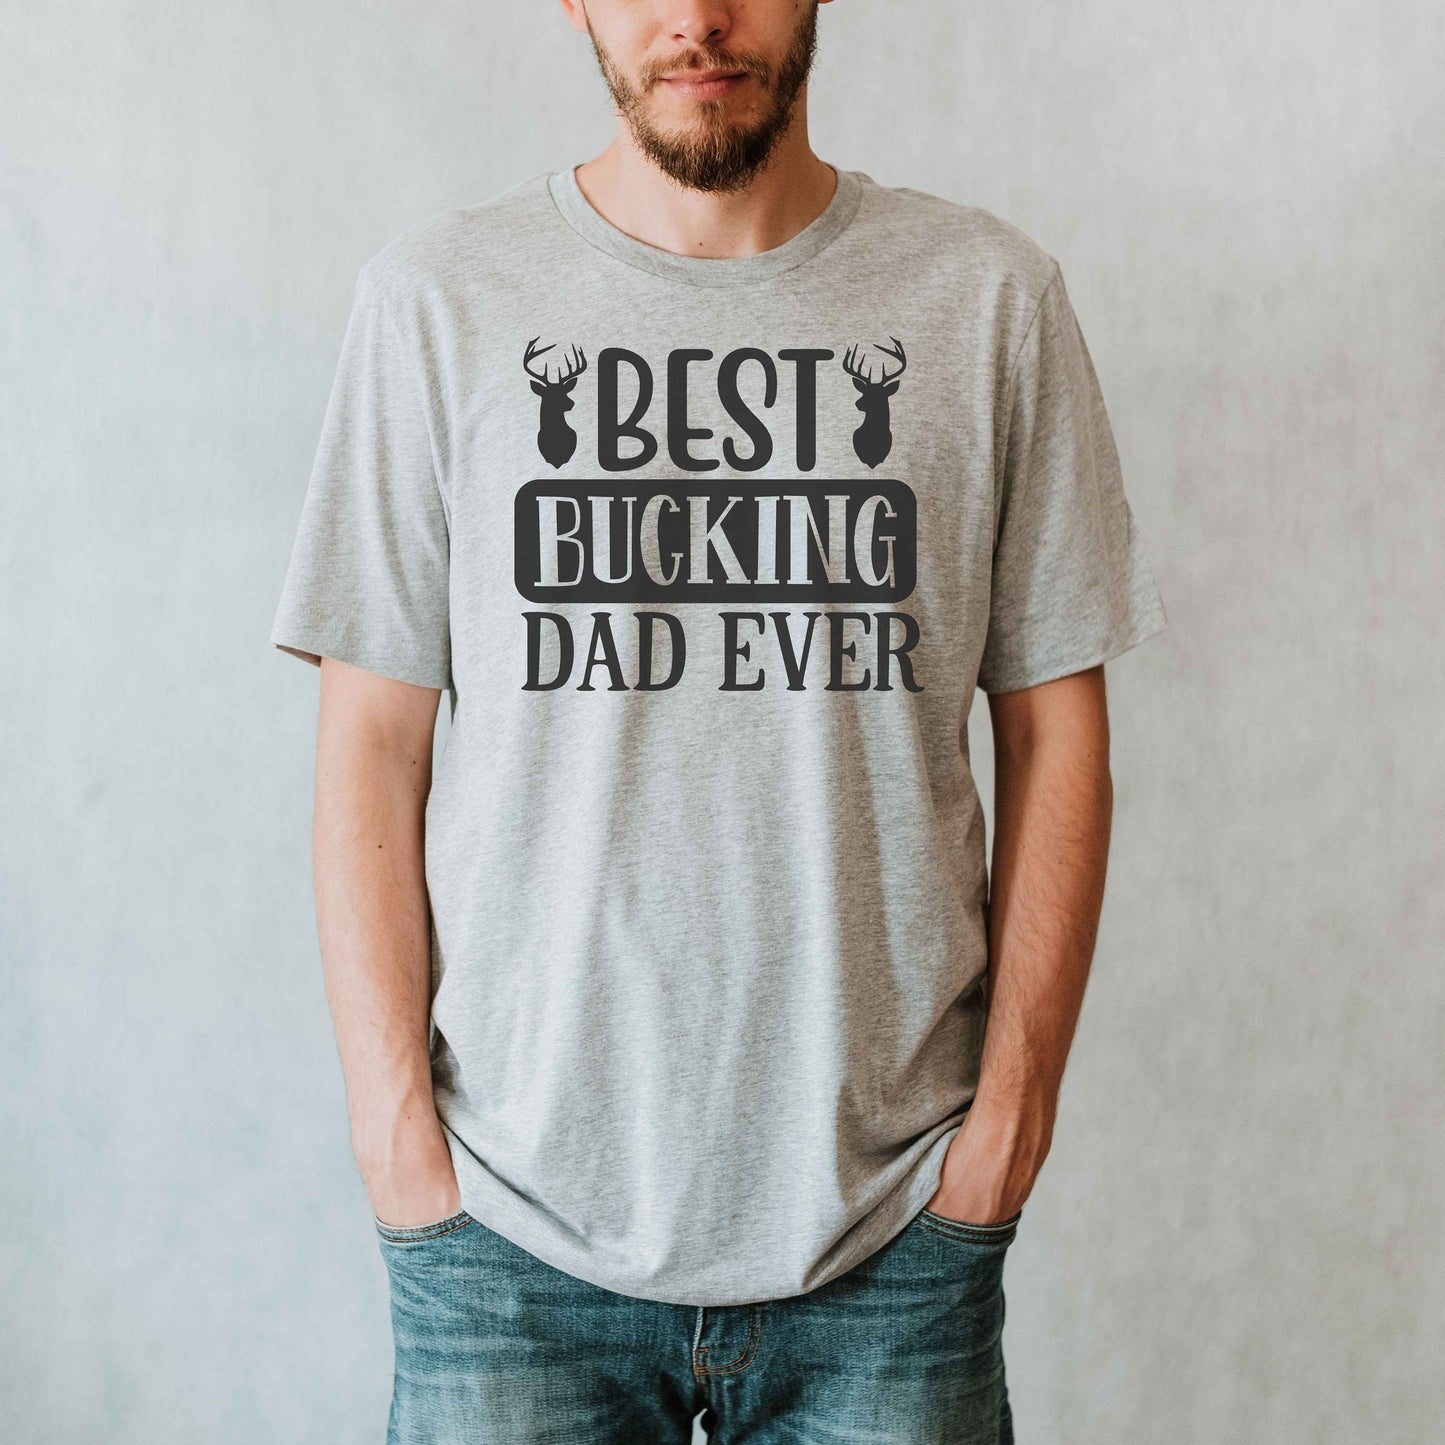 Best Bucking Dad Ever Shirt - Father's Day Shirt - Dad Shirt - Gifts for Dad - Dad Birthday Gift - Dad T-Shirt